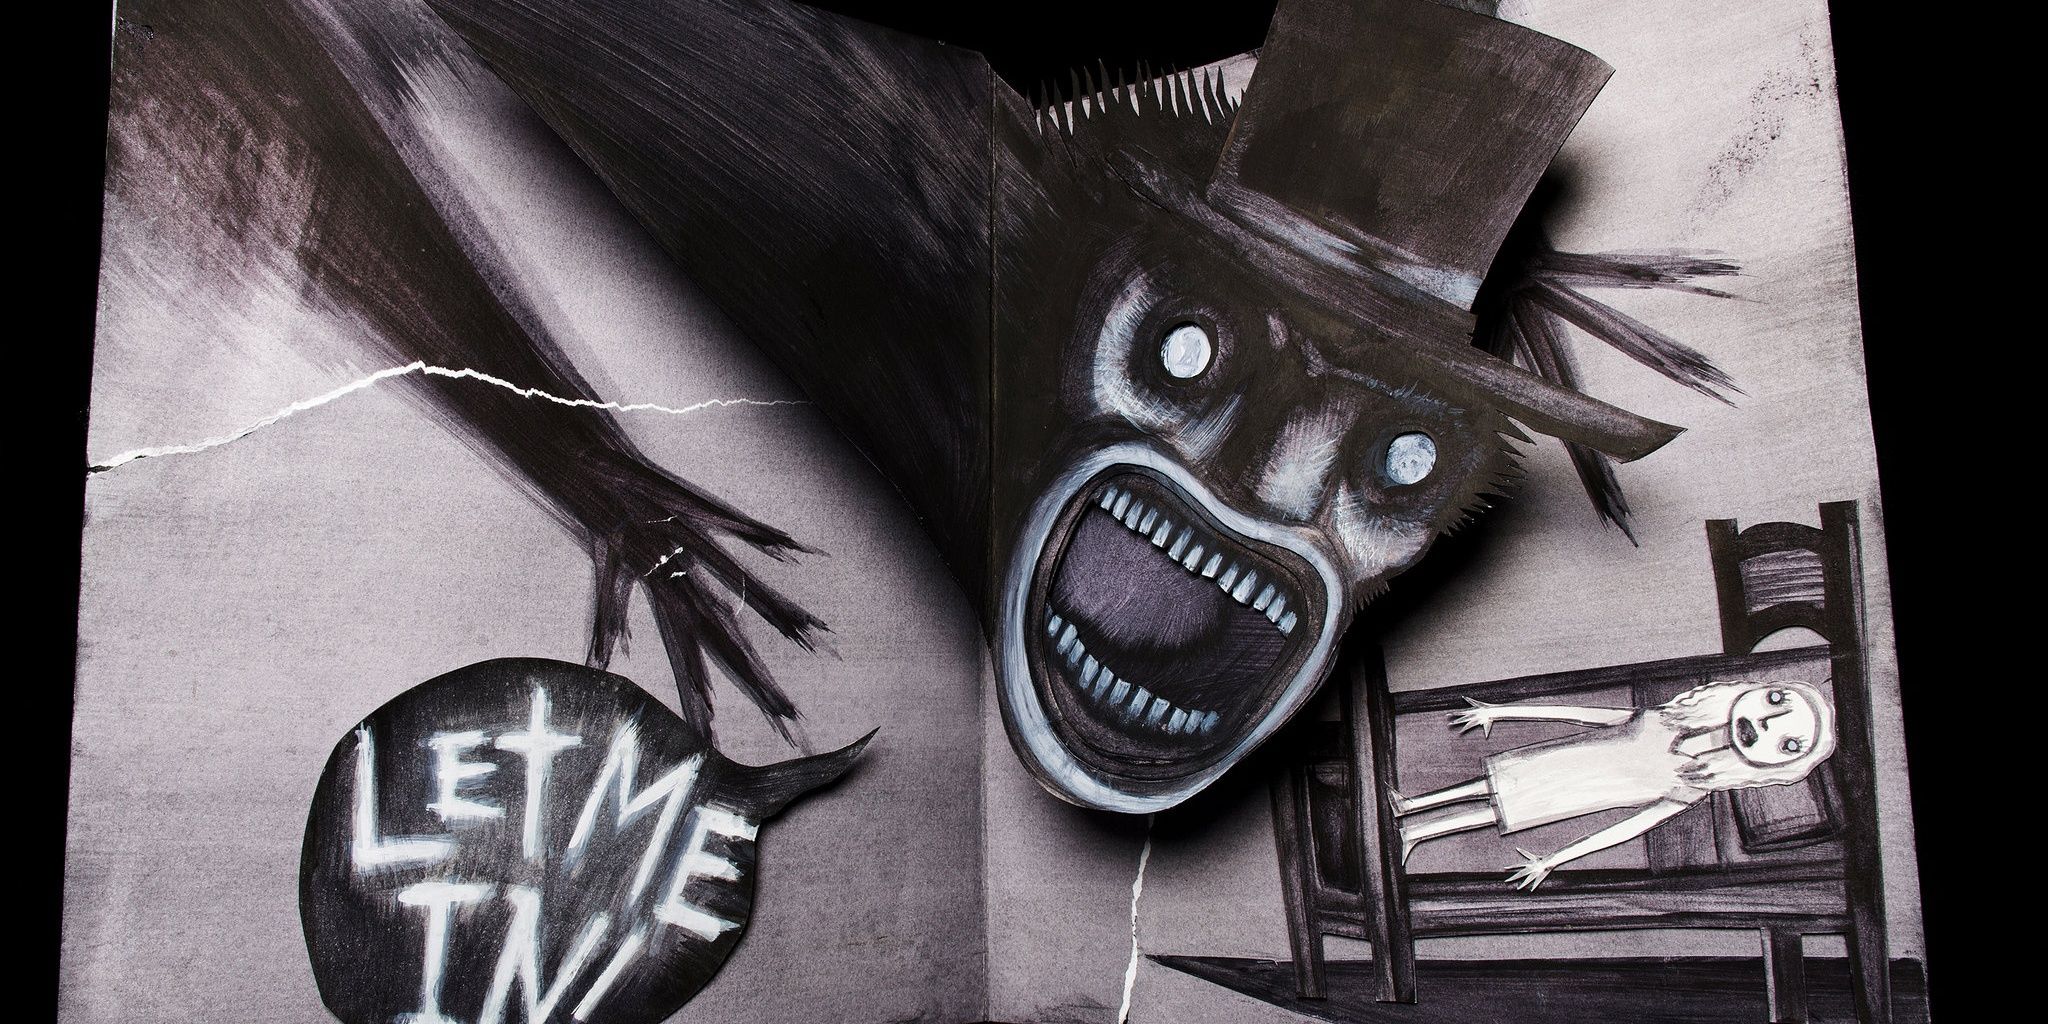 The 2D representation of The Babadook